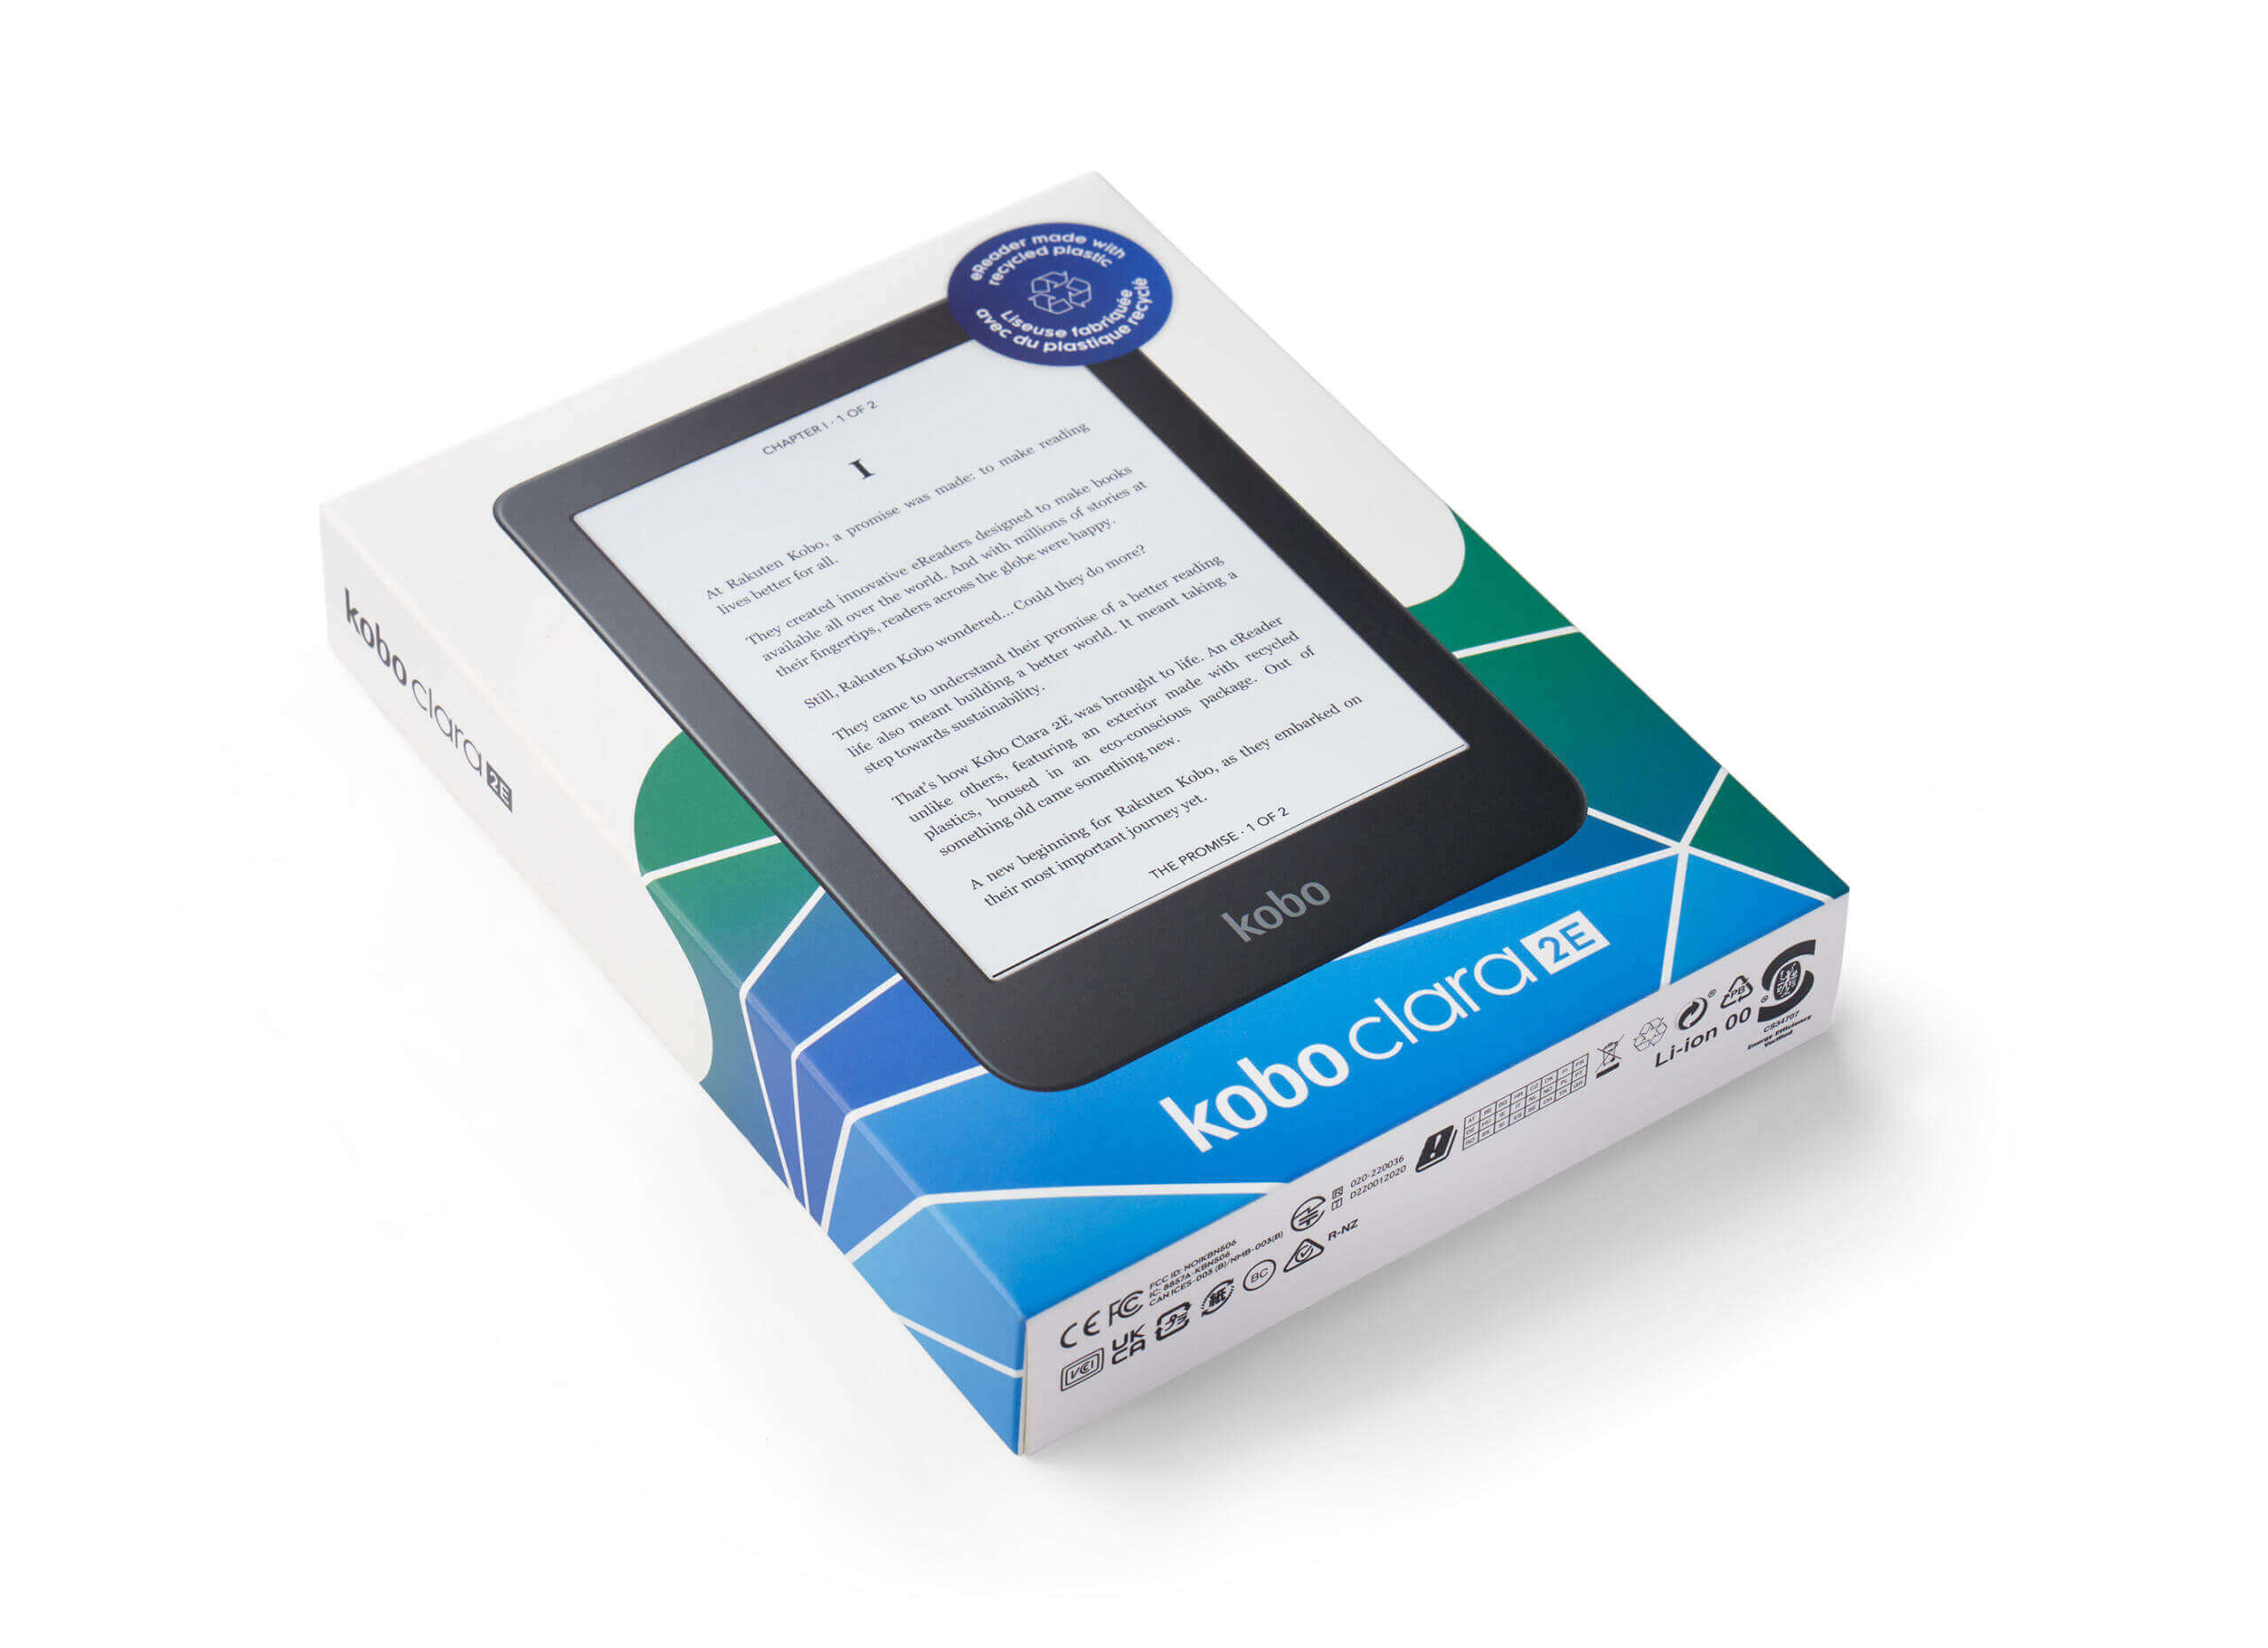 Borrow eBooks from the public library using your Kobo eReader